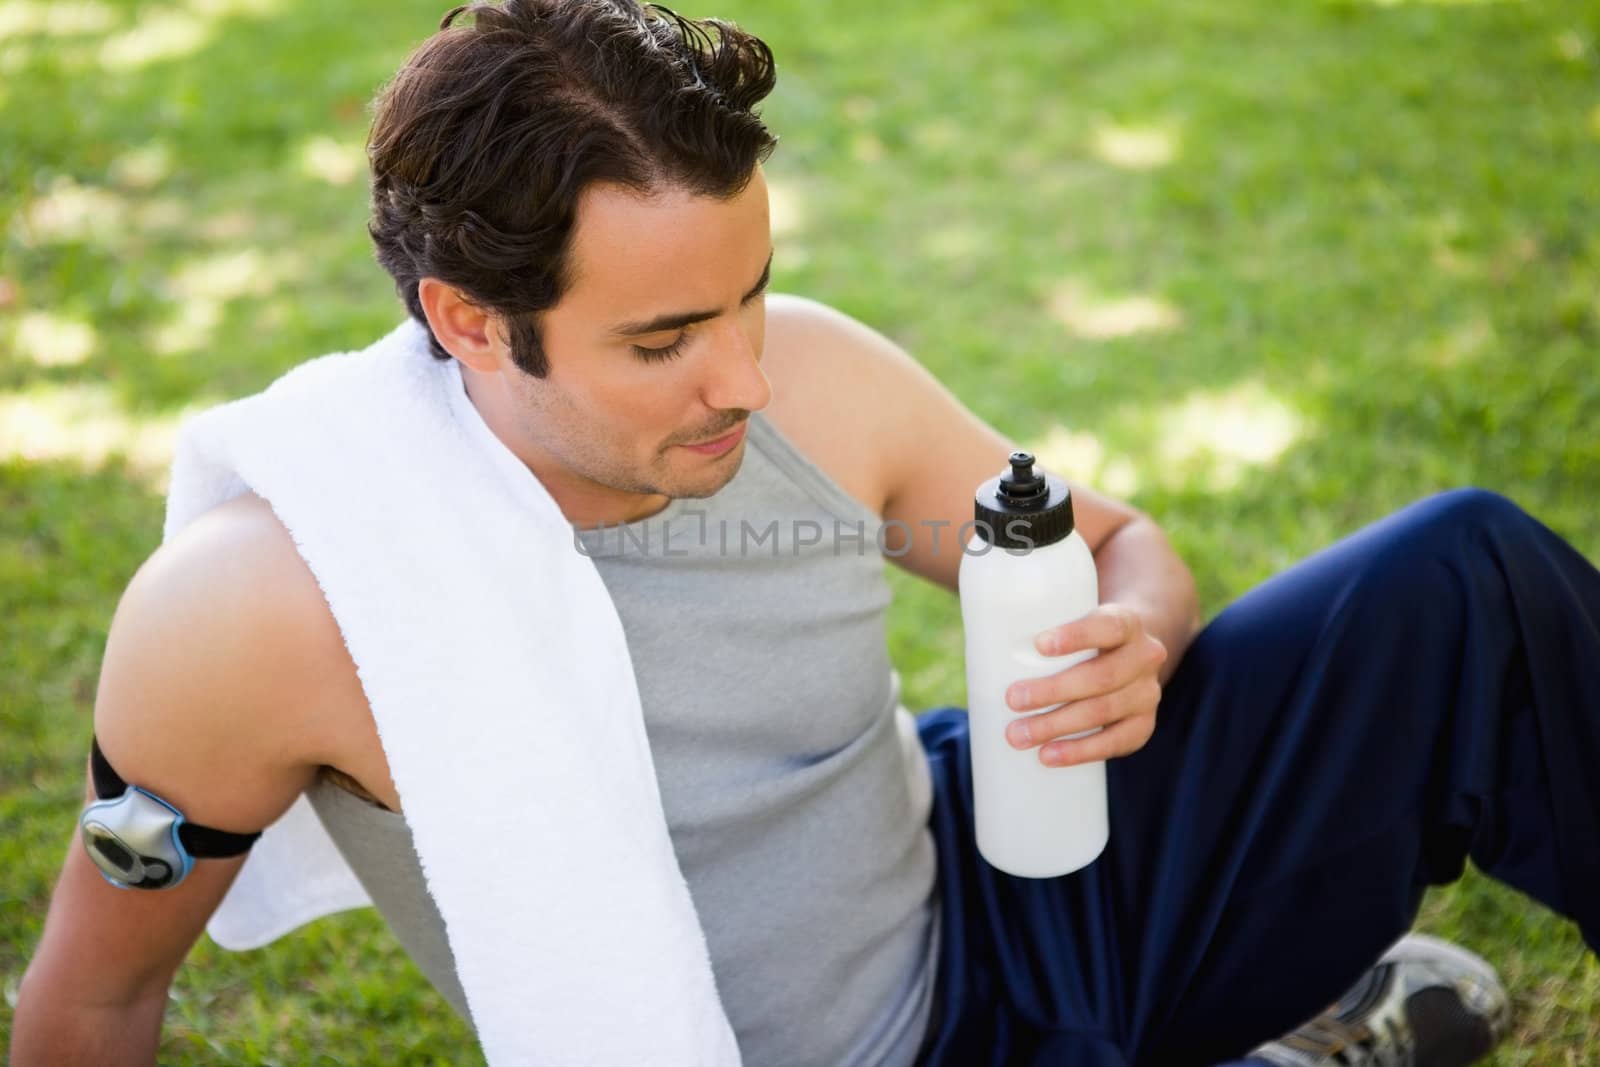 Man with a towel on his shoulder looking at a sports bottle by Wavebreakmedia